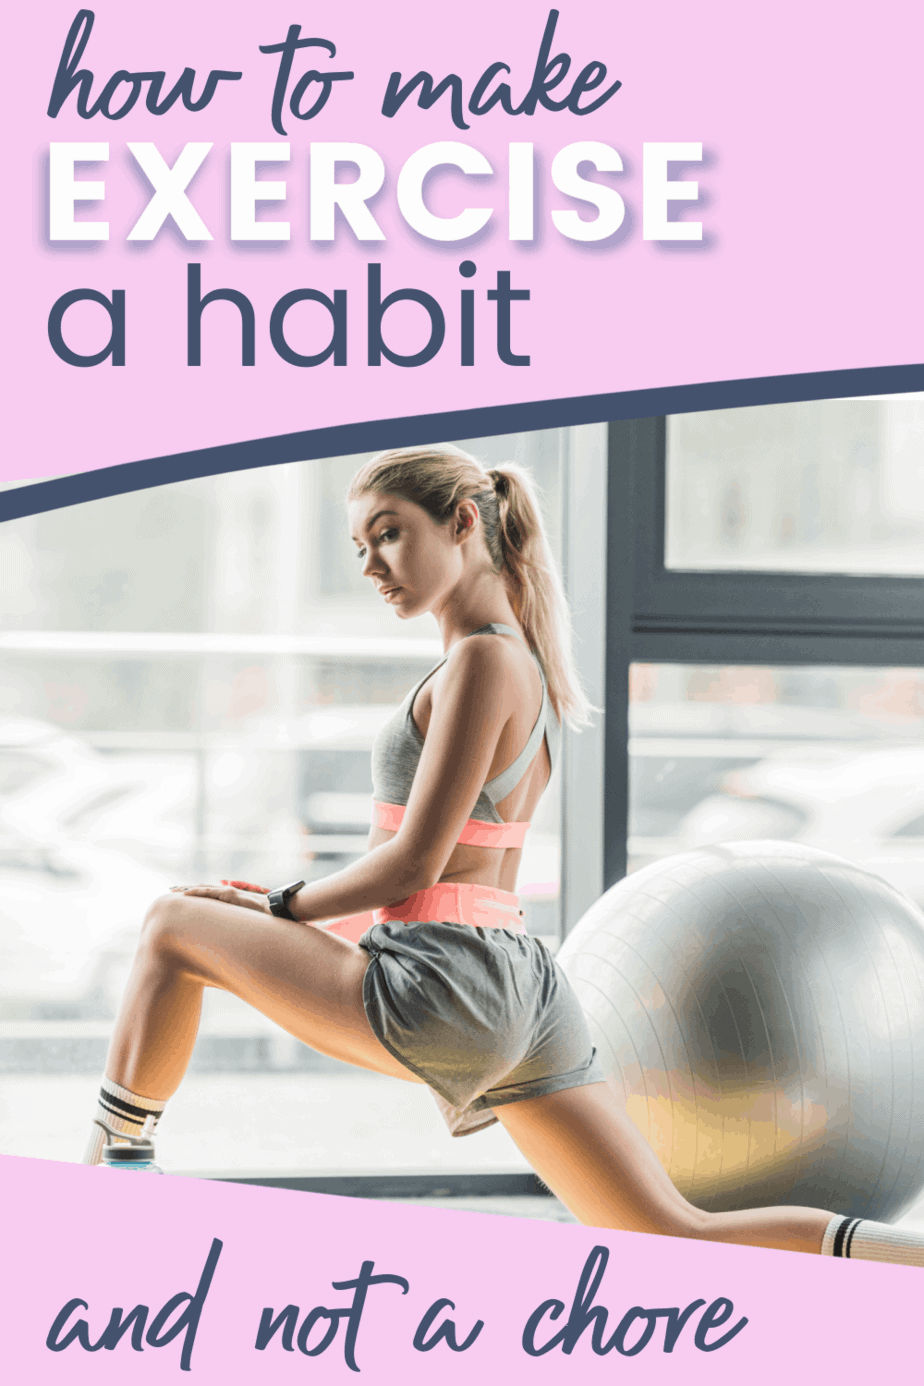 How To Make Exercise a habit